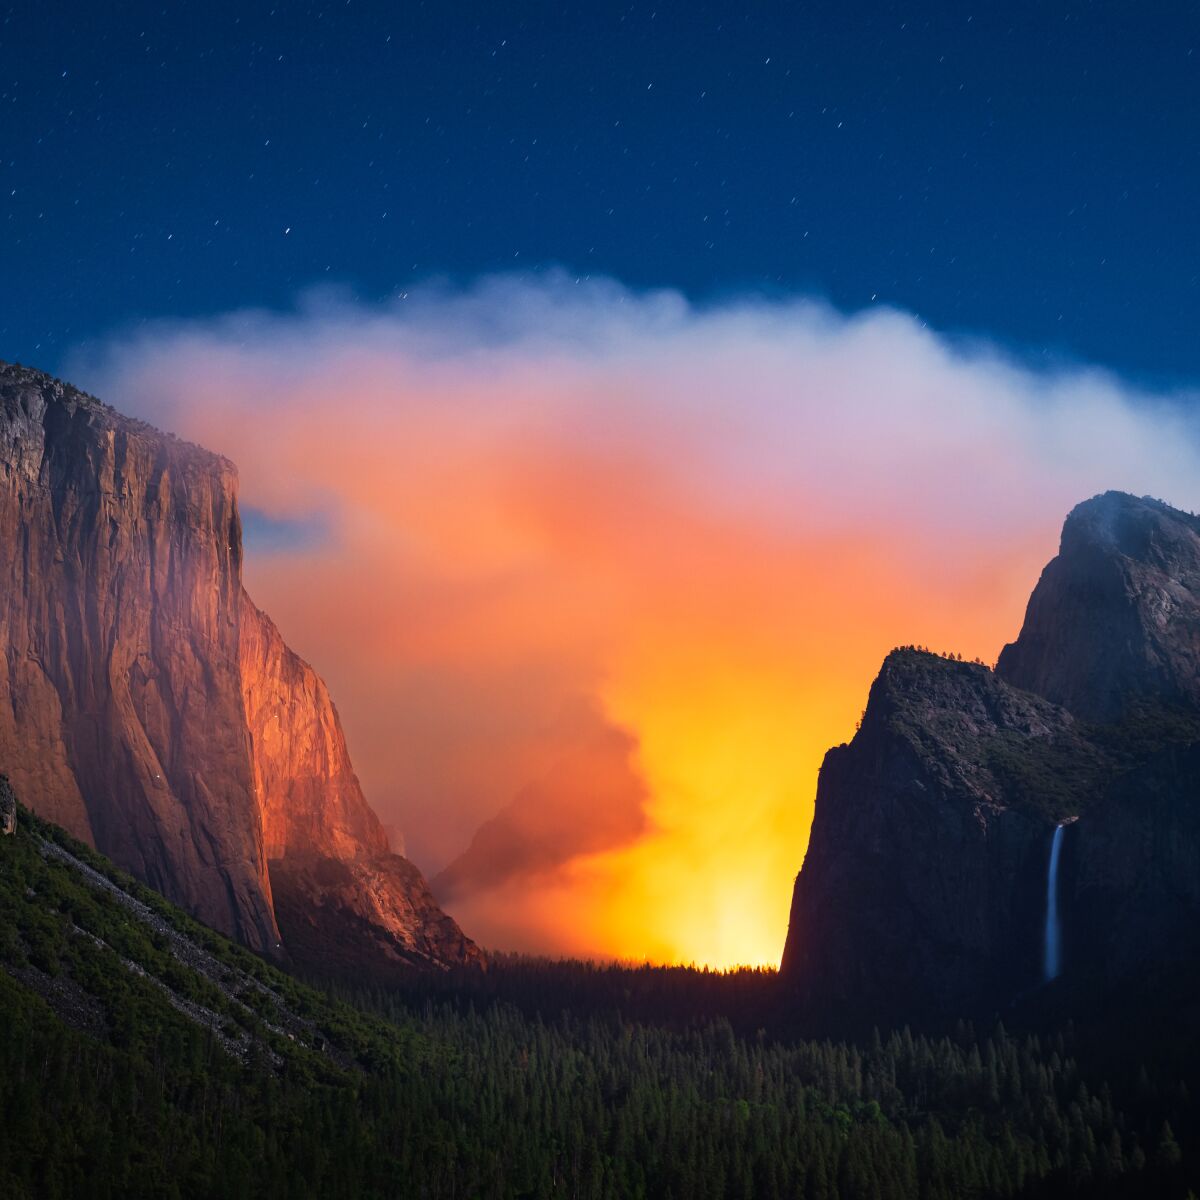 View of a fire burning in Yosemite.